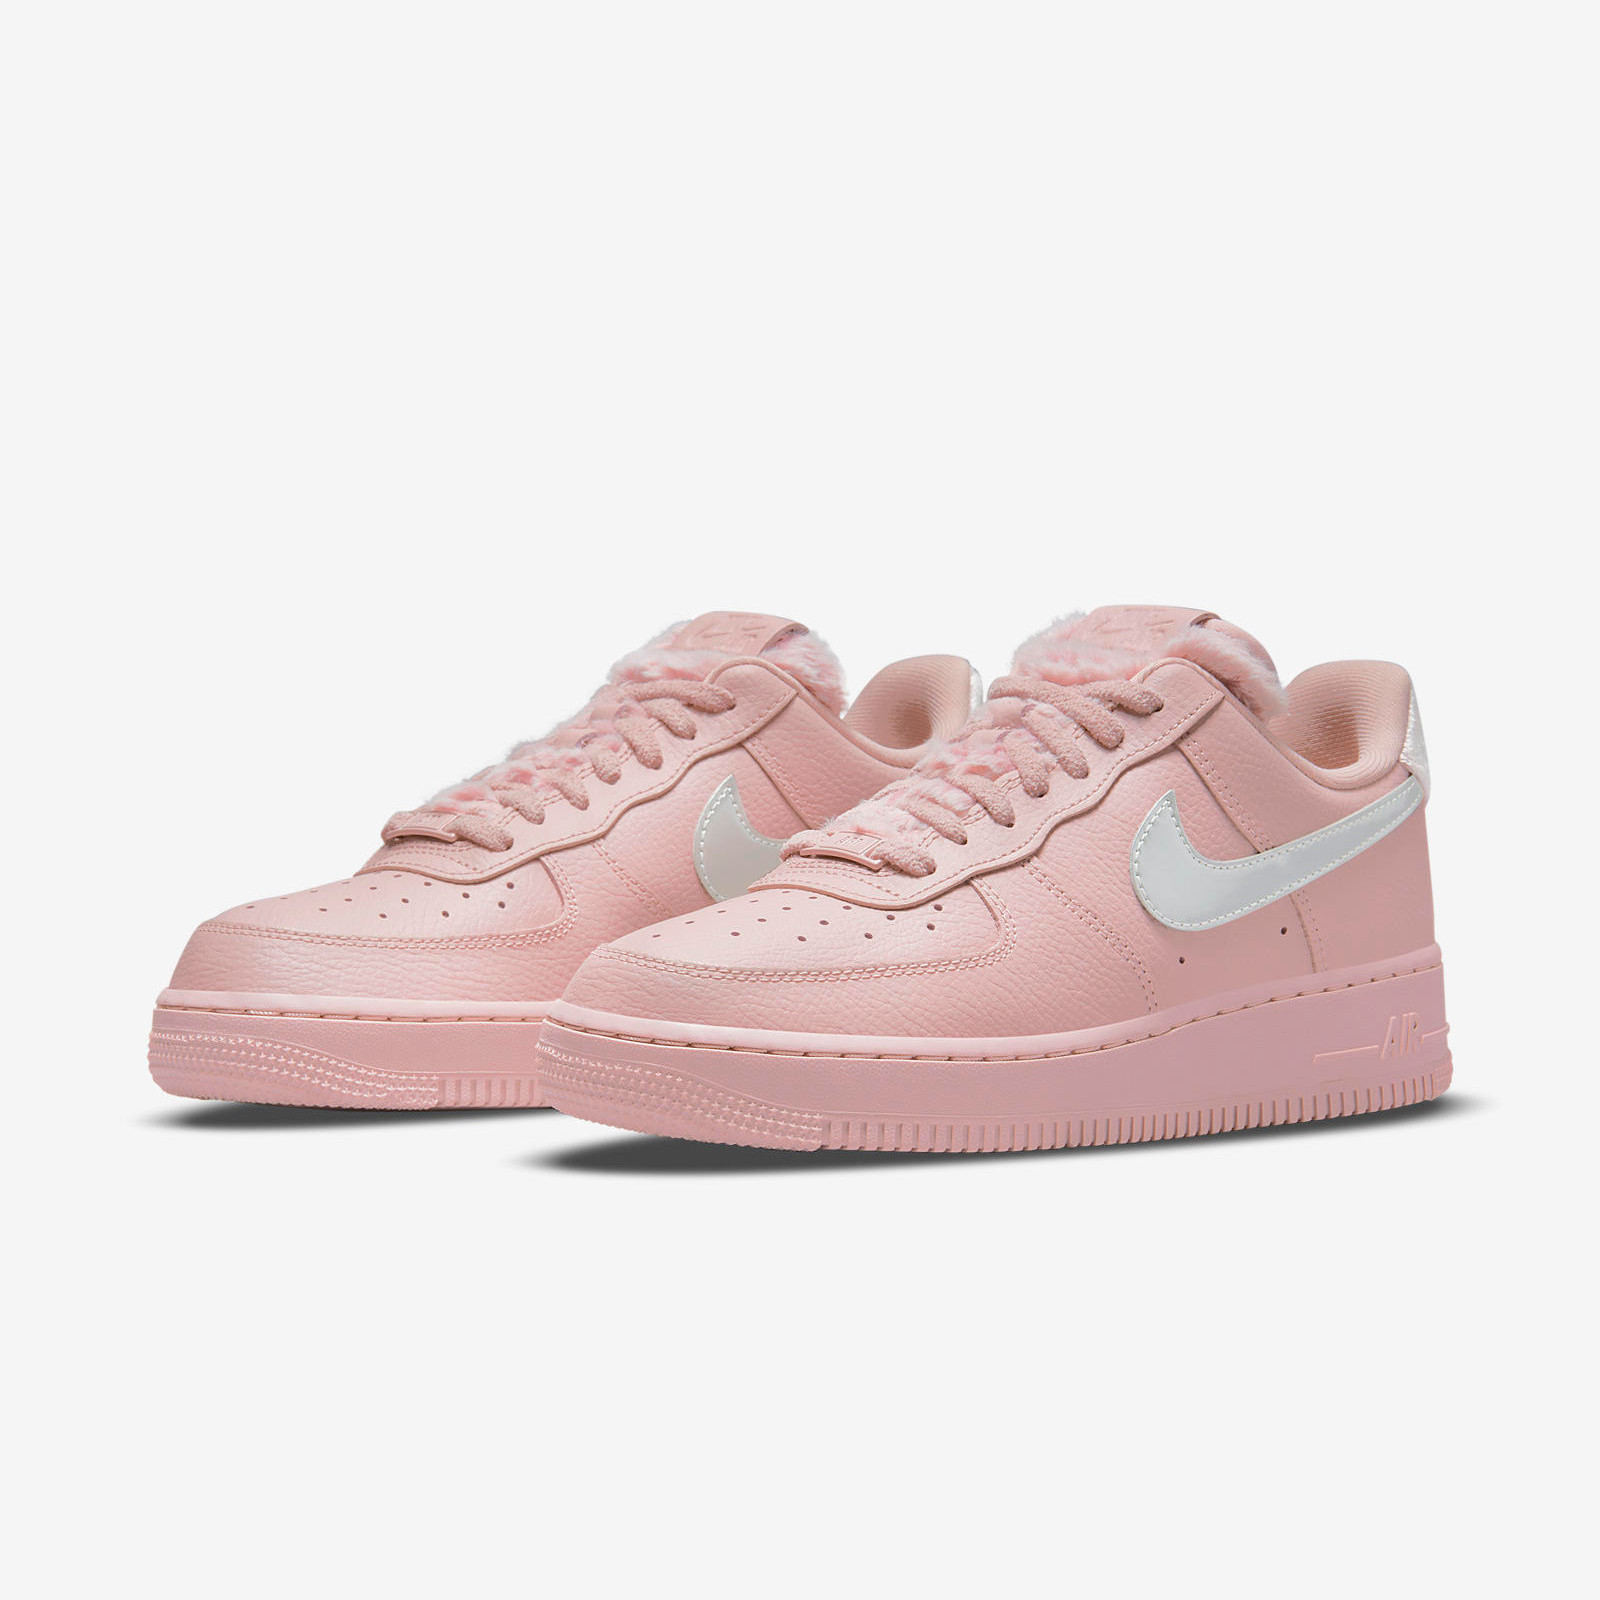 Nike Air Force 1 Low
« Pink Oxford »